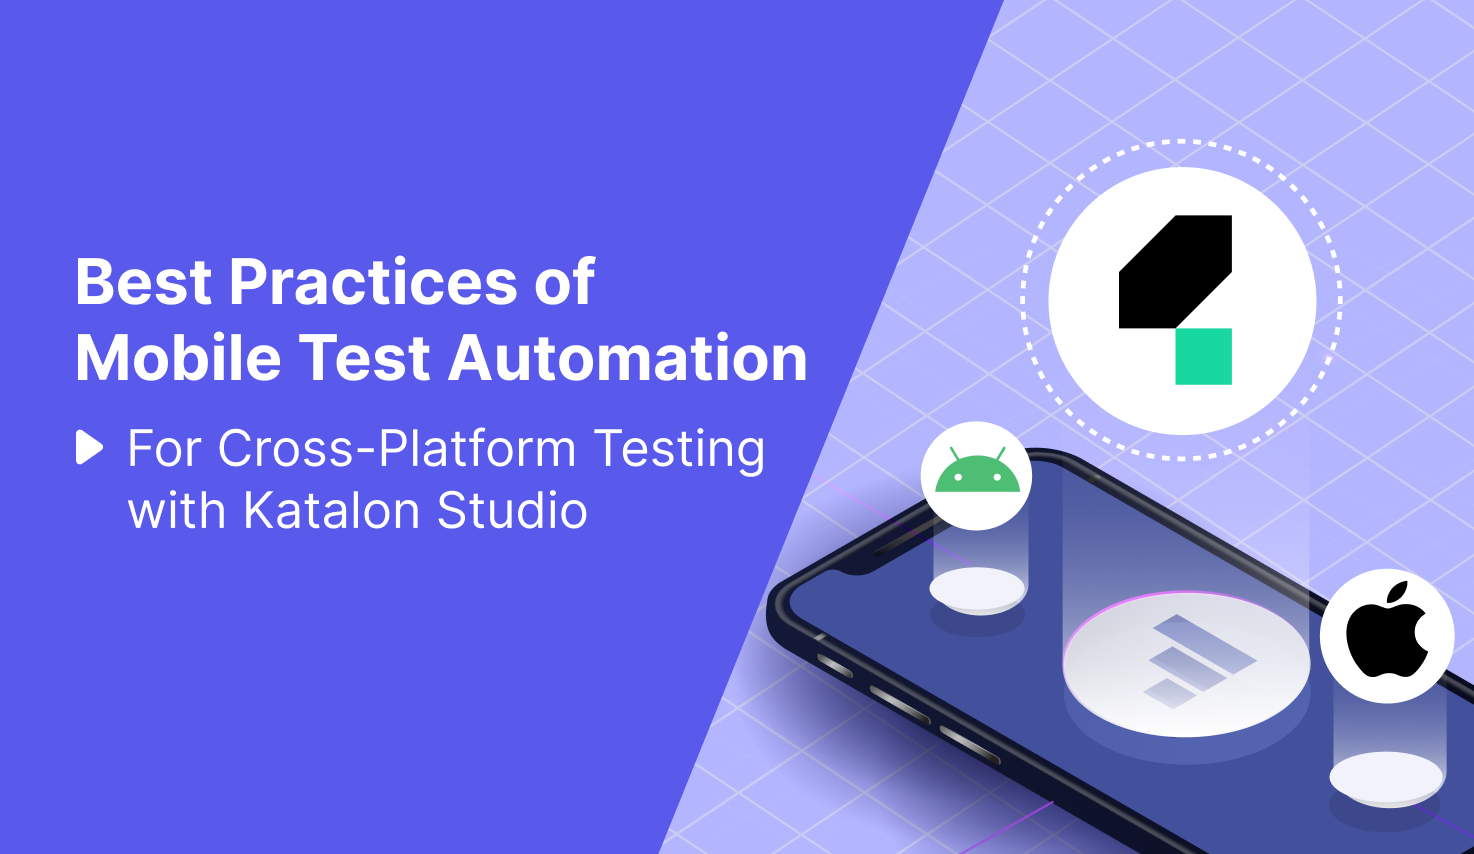 best practices of mobile test automation for cross-platform testing with Katalon featured image